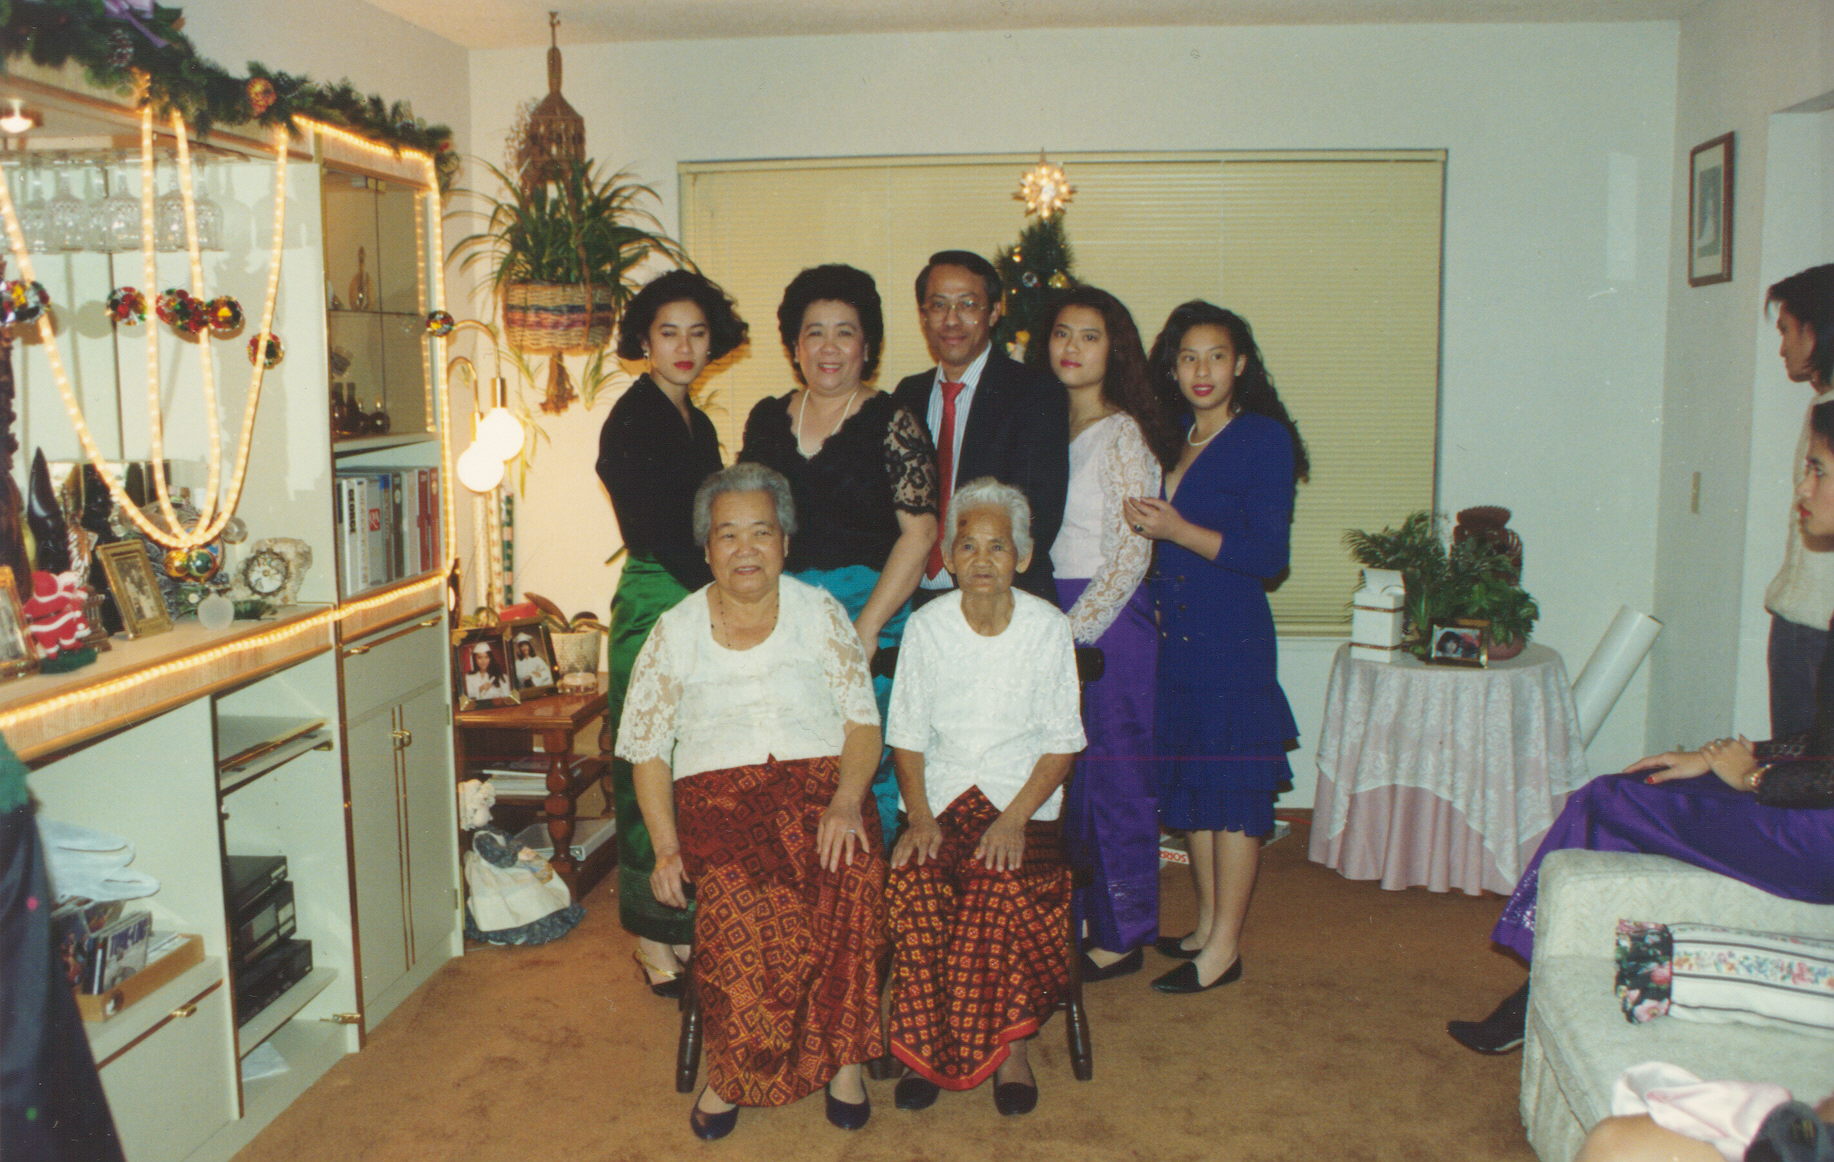 Ngak family with the two Grandmothers.